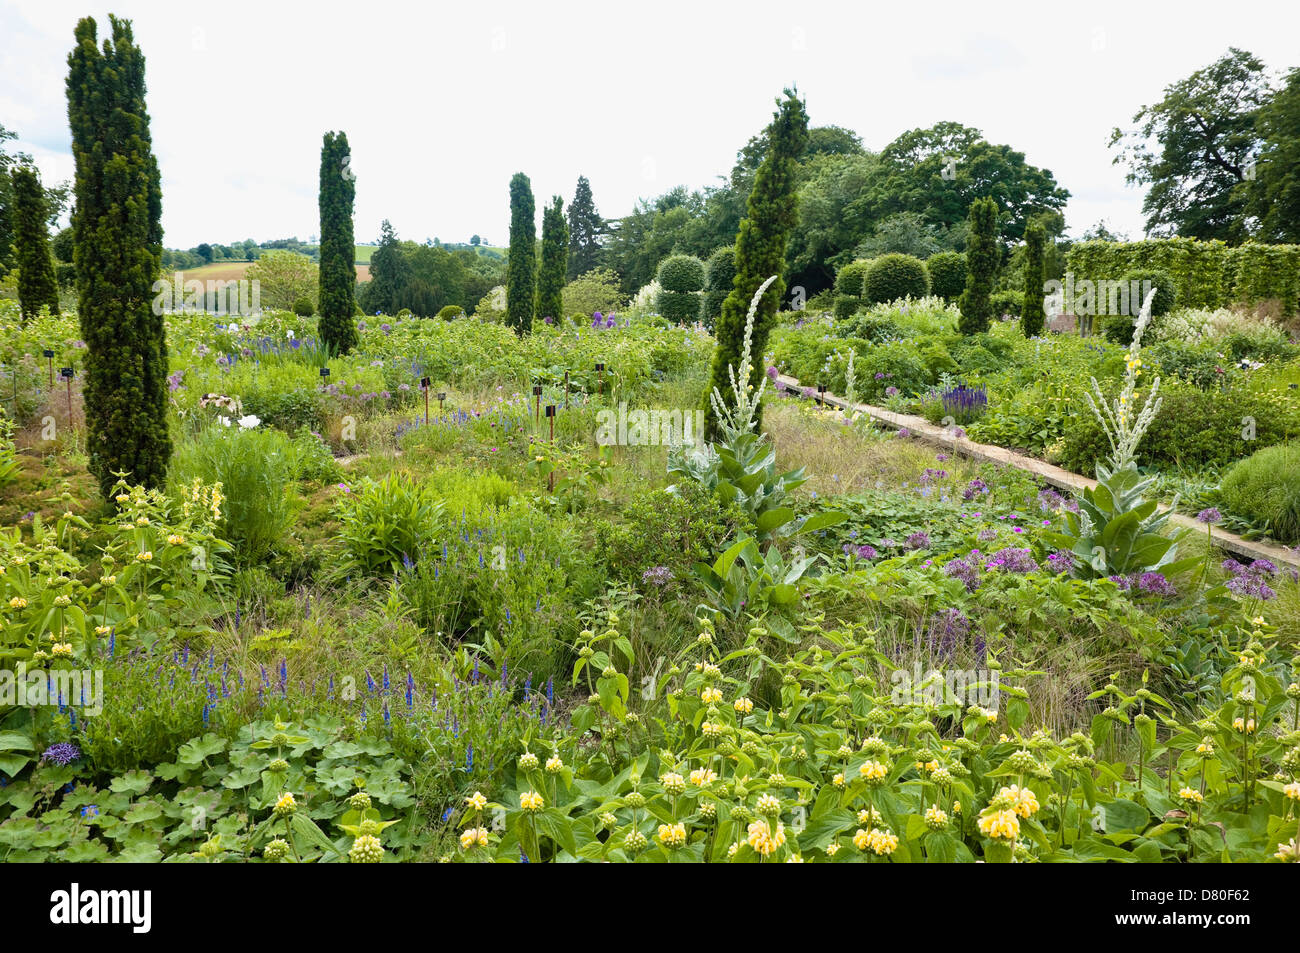 A mix of herbaceous planting, contrasting with pencil thin trees within the walled garden at Broughton Grange, Oxfordshire, UK. Stock Photo